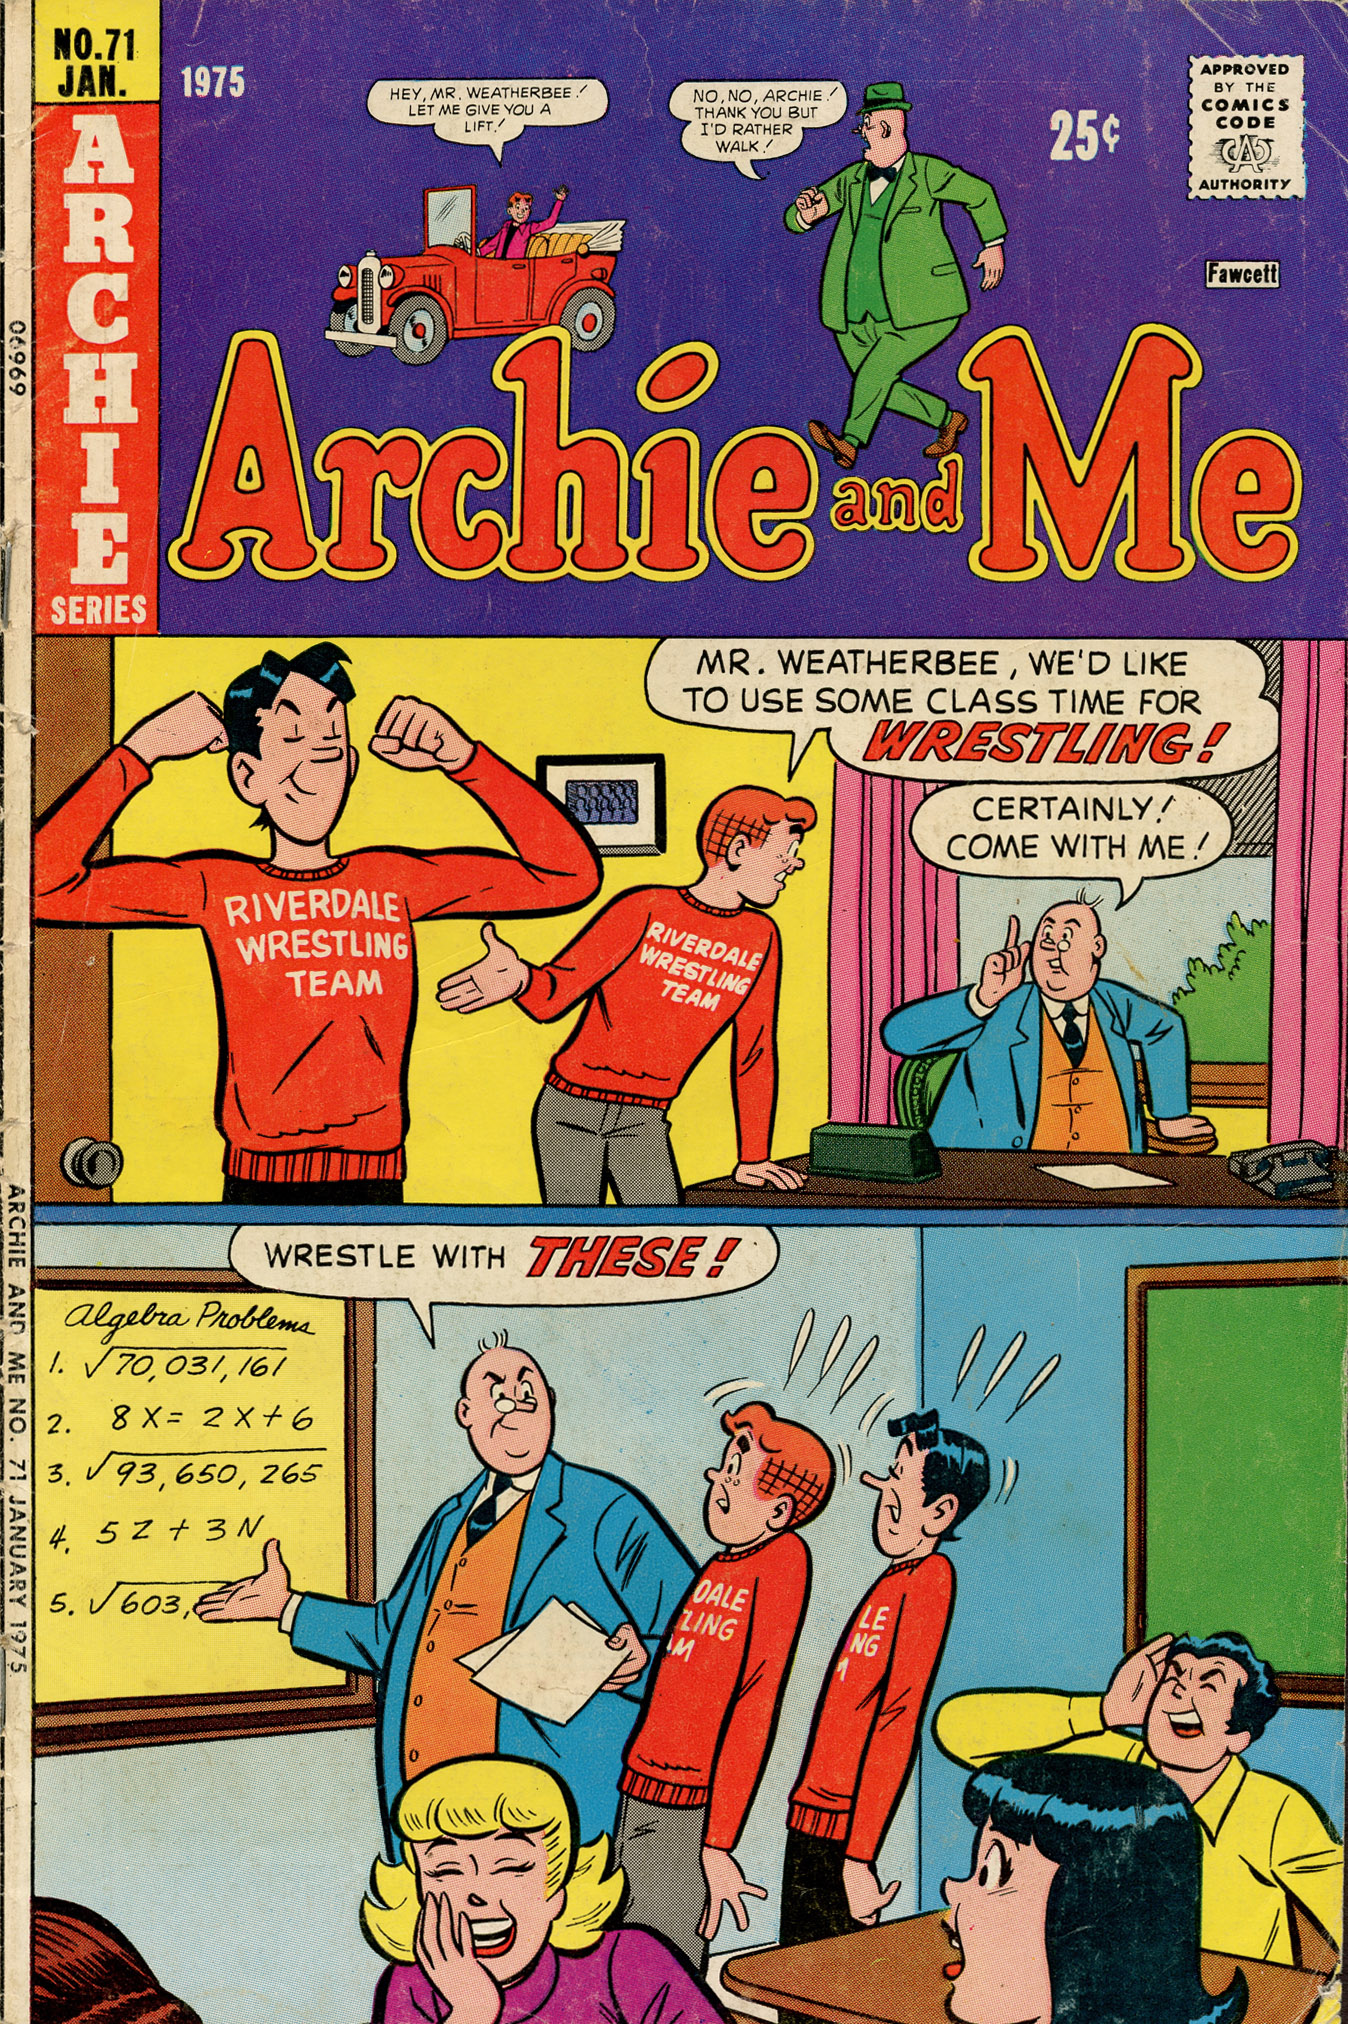 Read online Archie and Me comic -  Issue #71 - 1